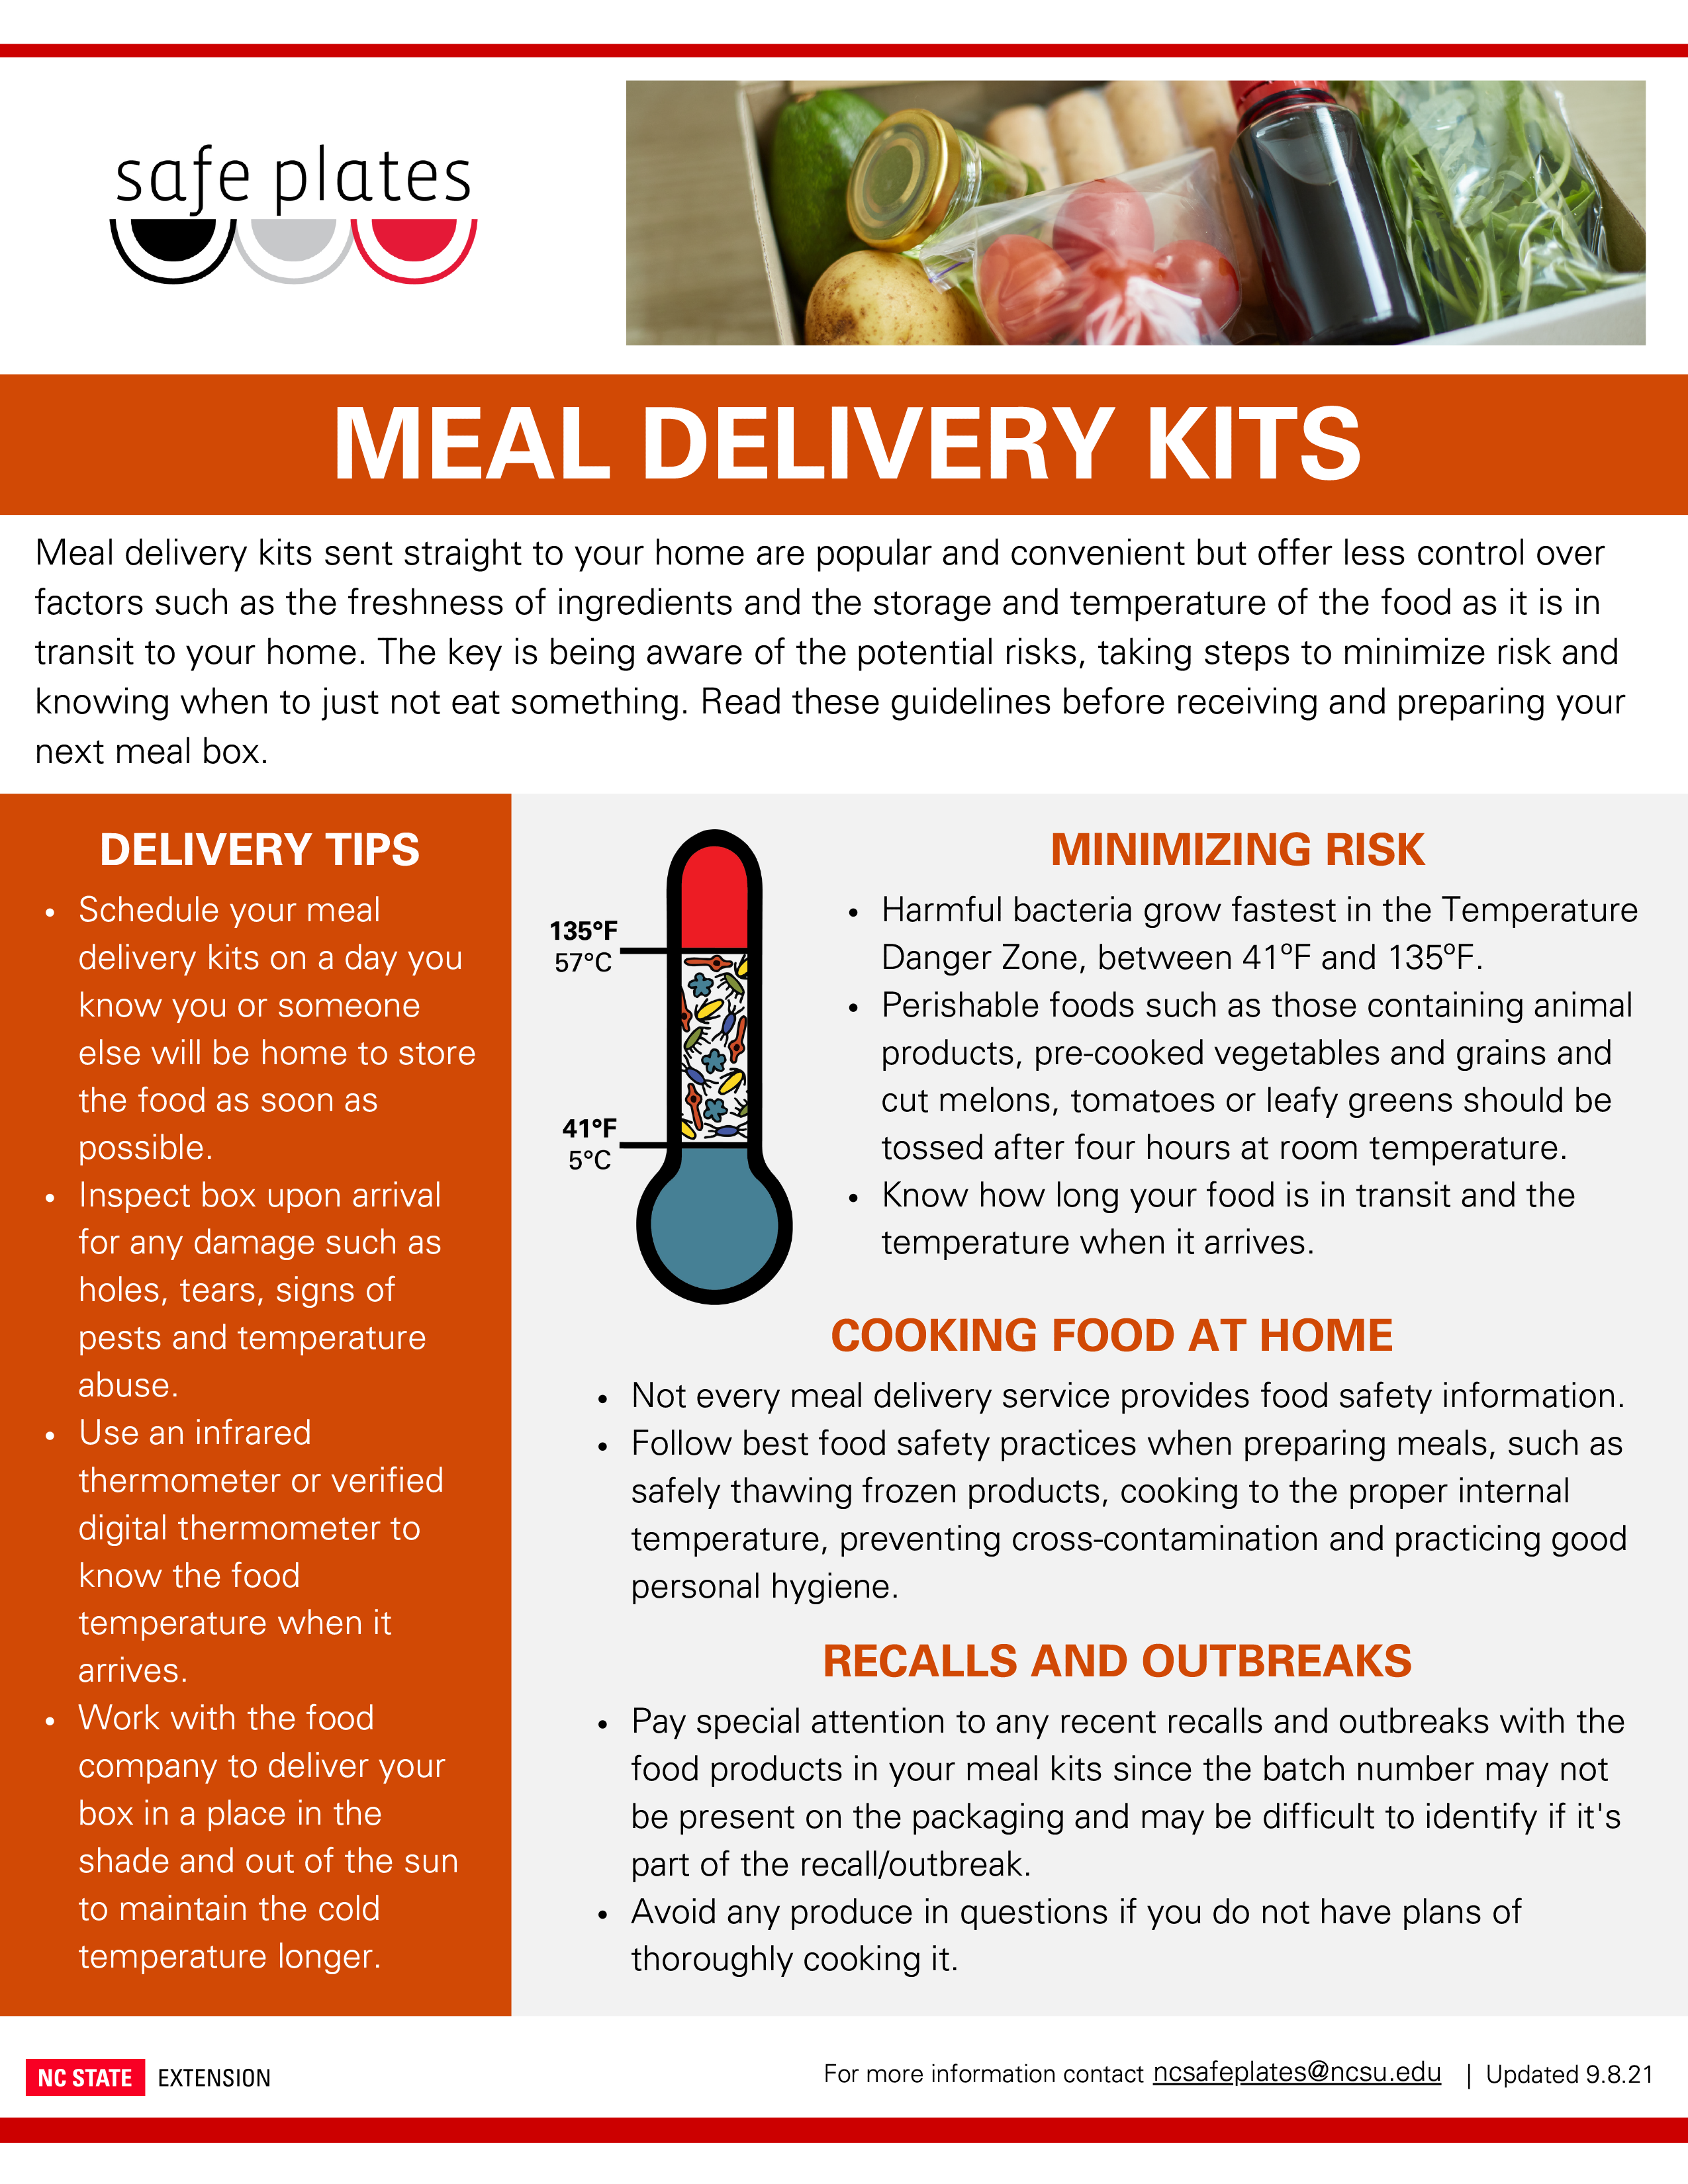 Food Safety Tips for Home Meal Delivery Kits, Homegrown